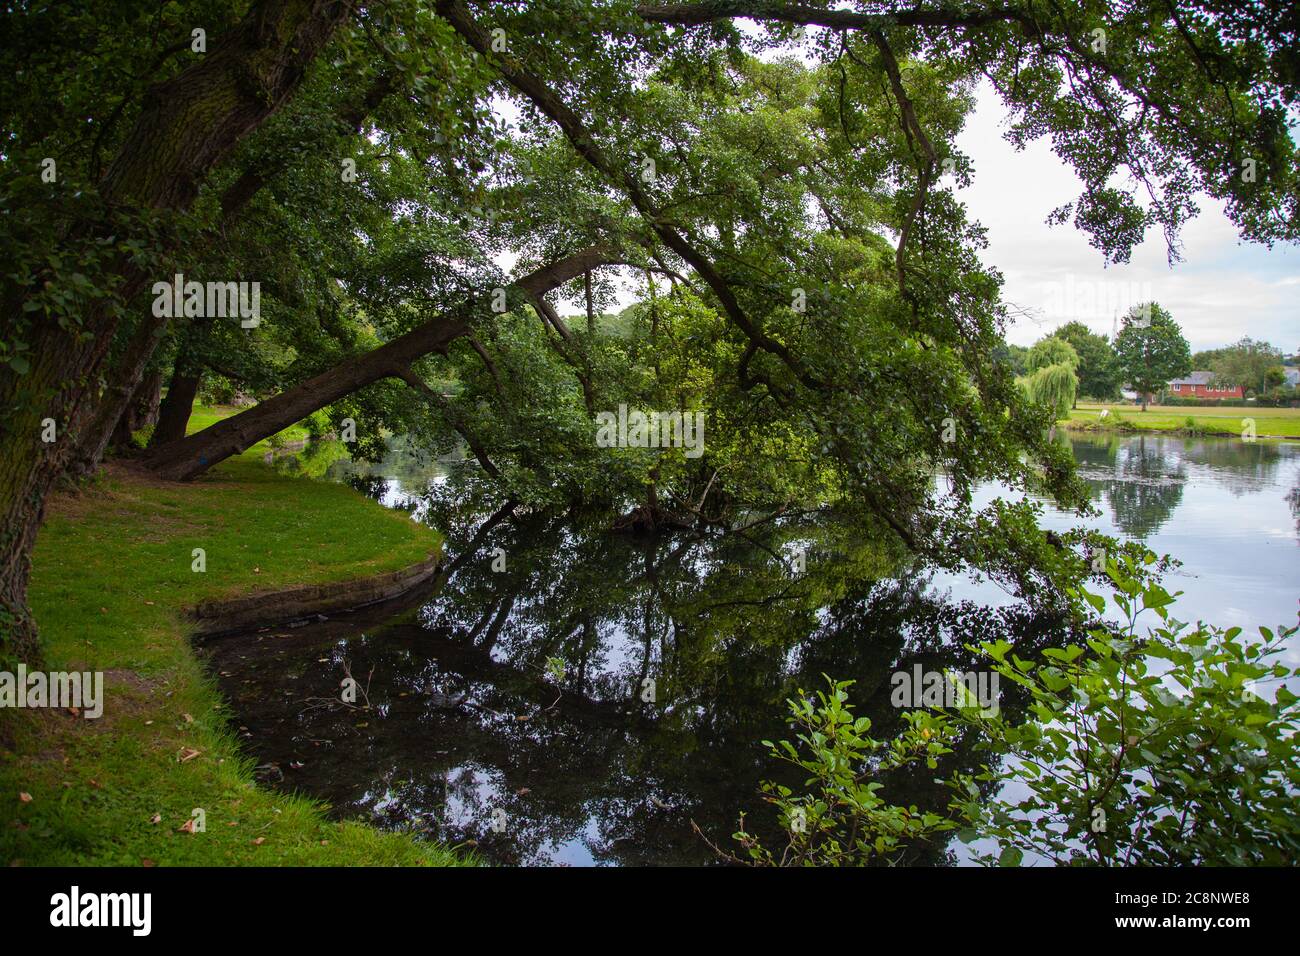 Trees reflections, open spaces, parkland, forest, woodland, local amenity, lake side, landscape, deciduous, evergreen, screening, screen, natural. Stock Photo